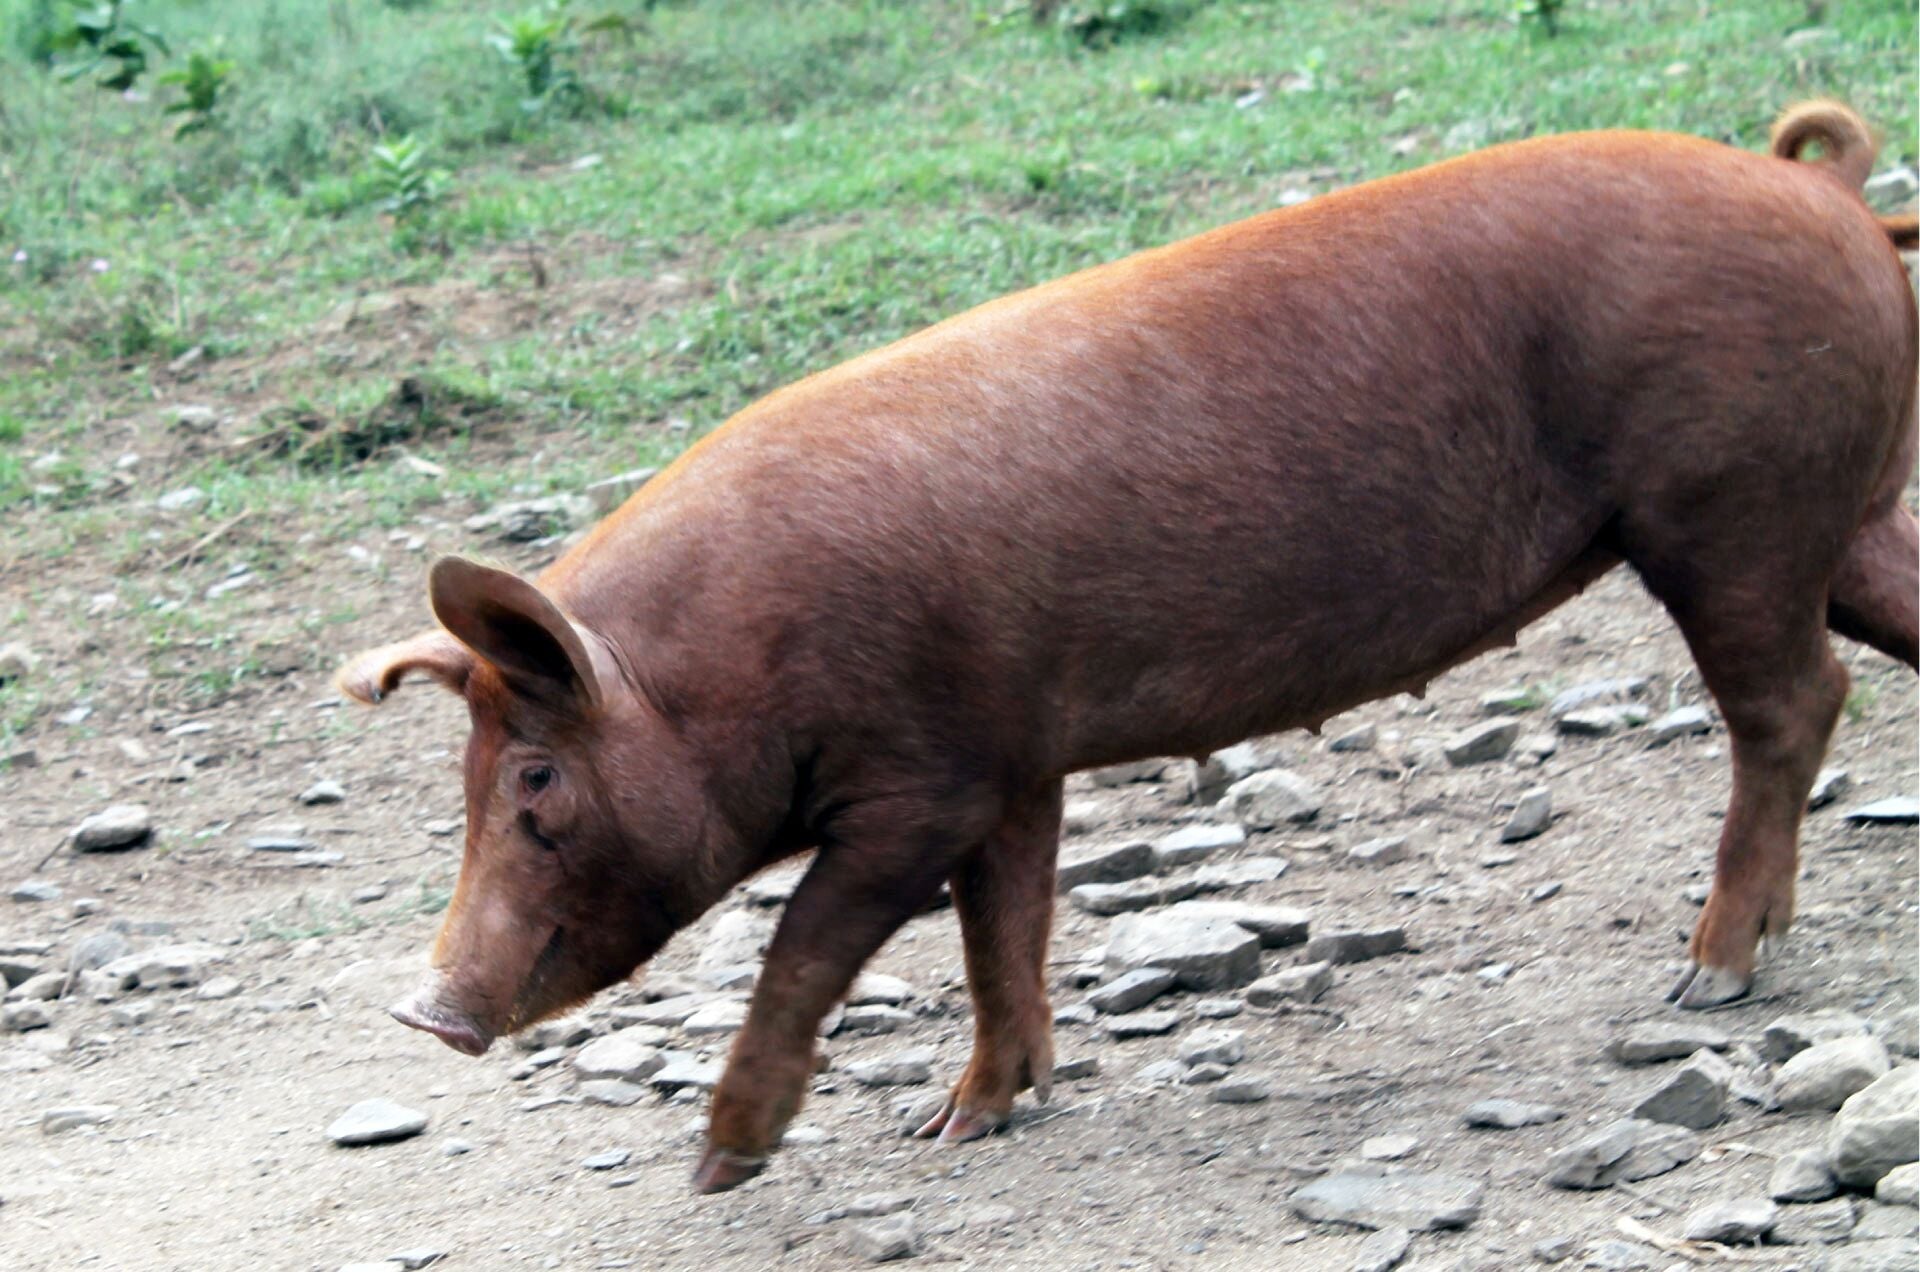 types of pigs in africa